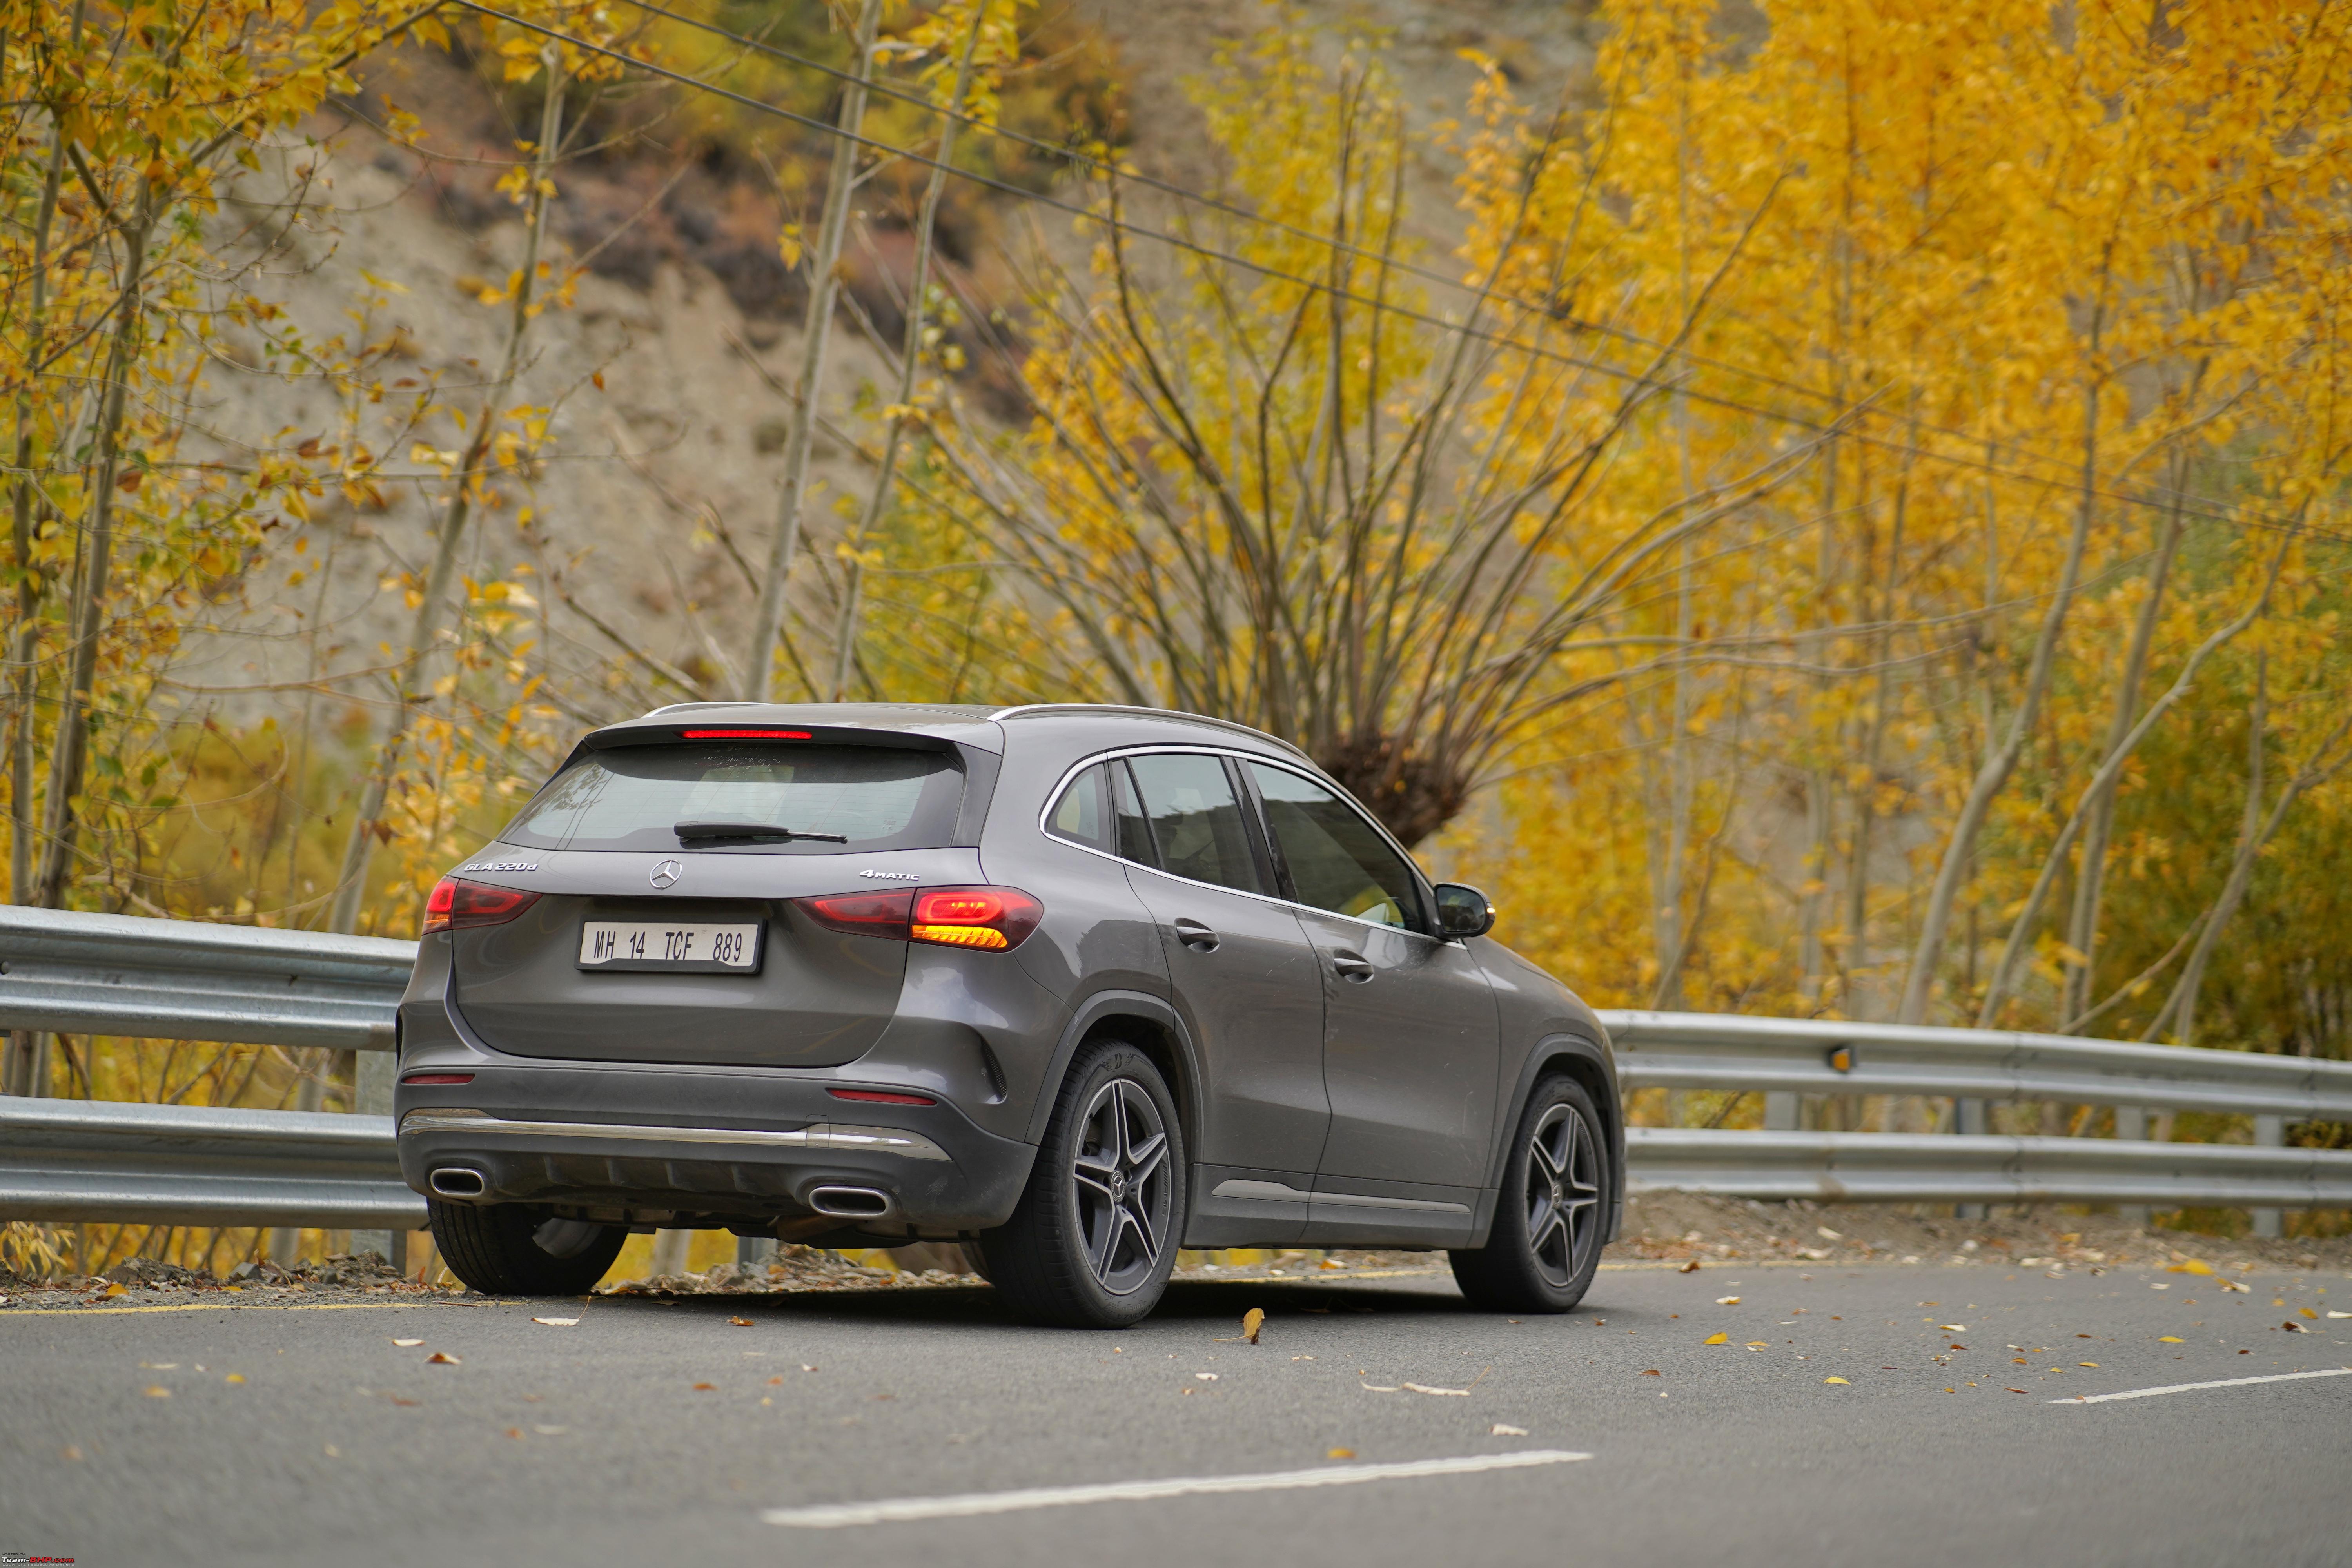 Mercedes-Benz GLA 220d Review - Forbes India